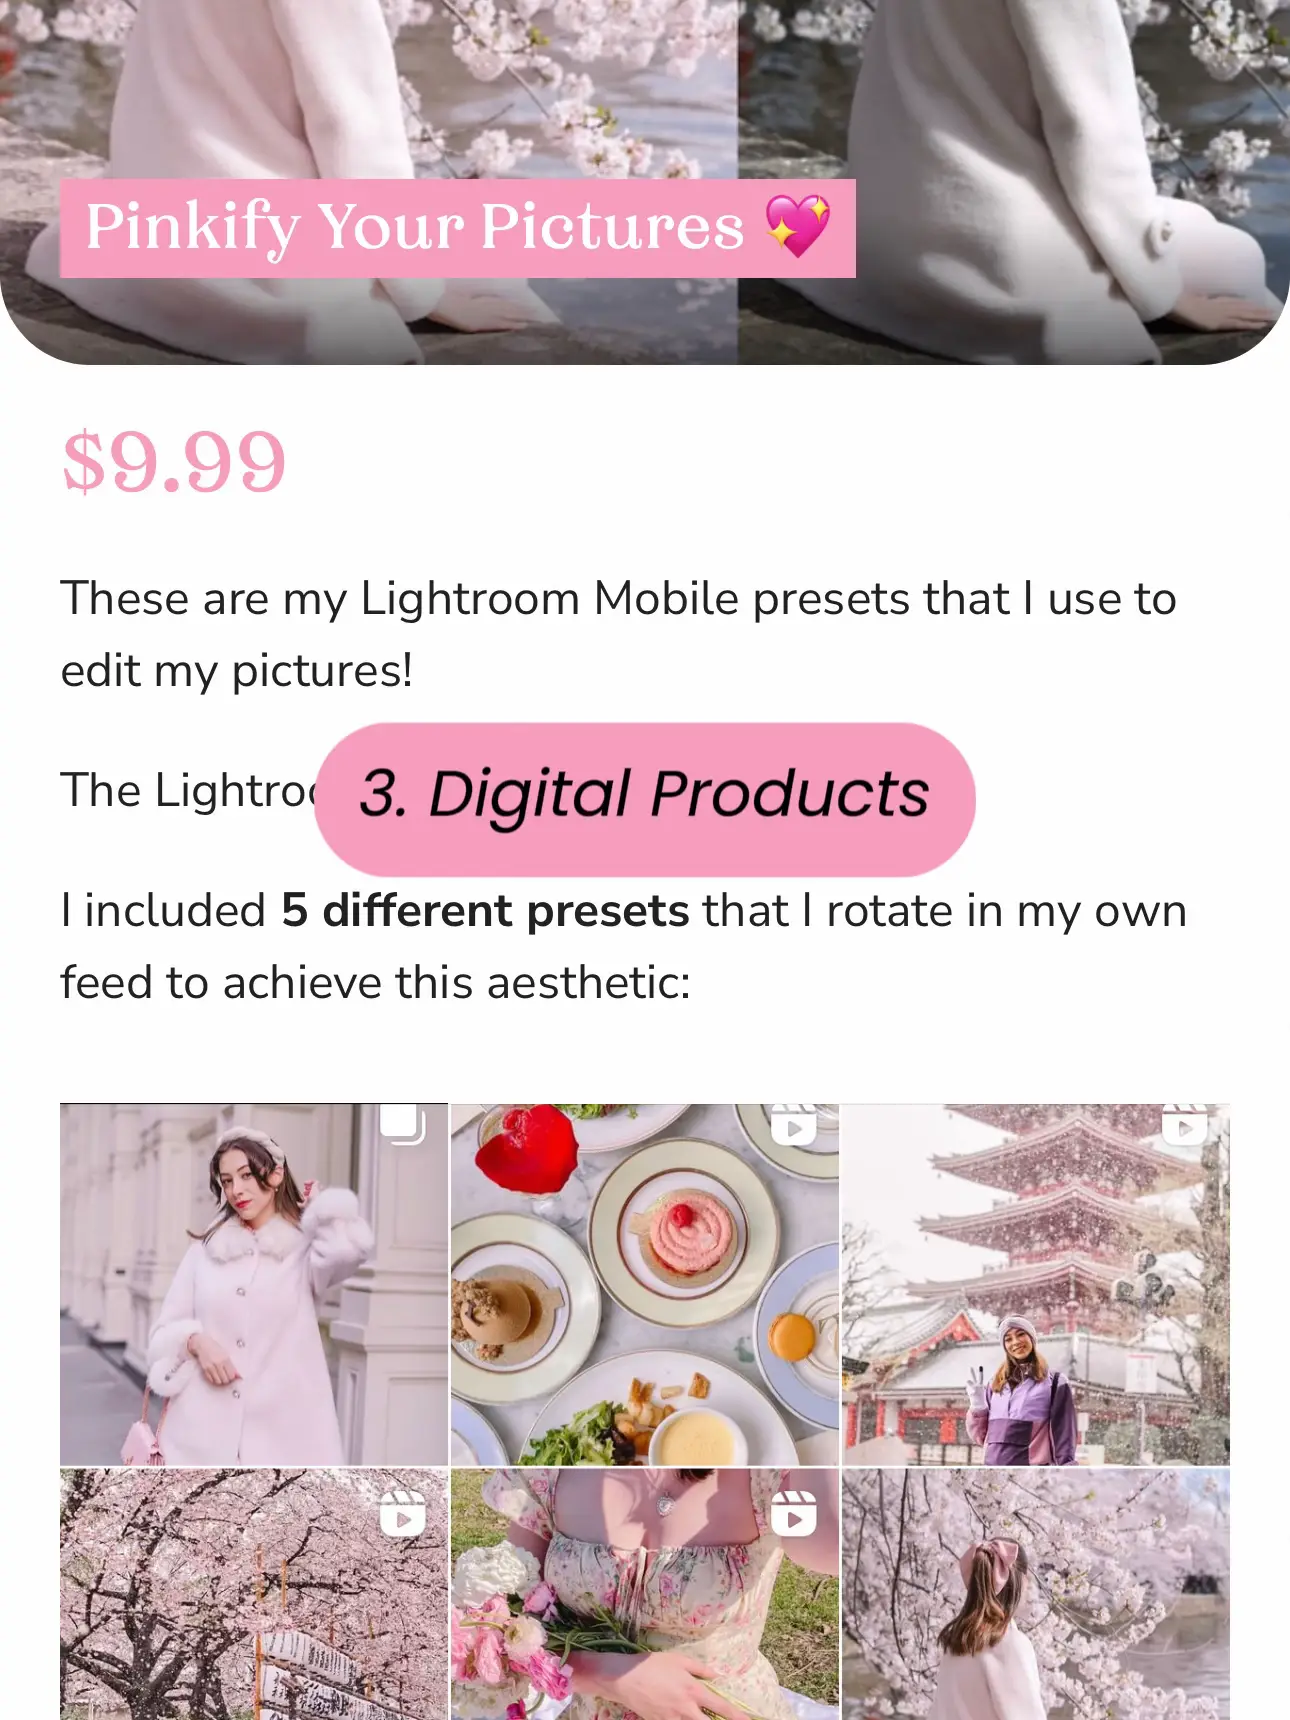  A pink background with a text that says "3. Digital Products".